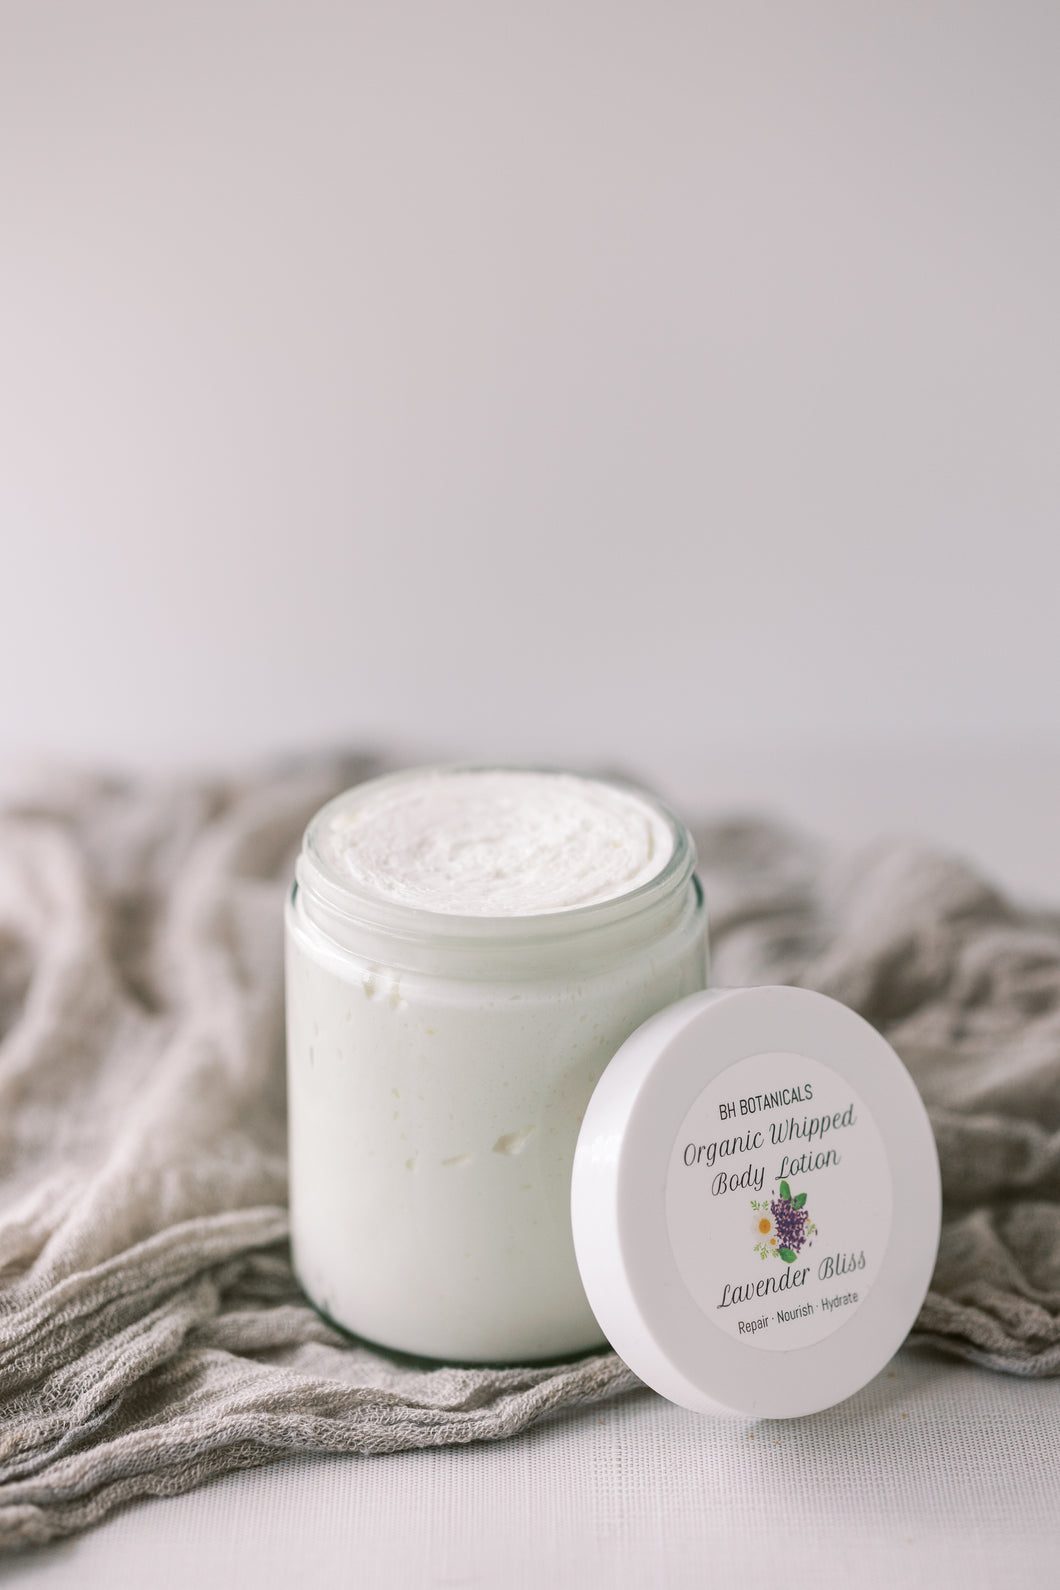 Whipped Body Lotion